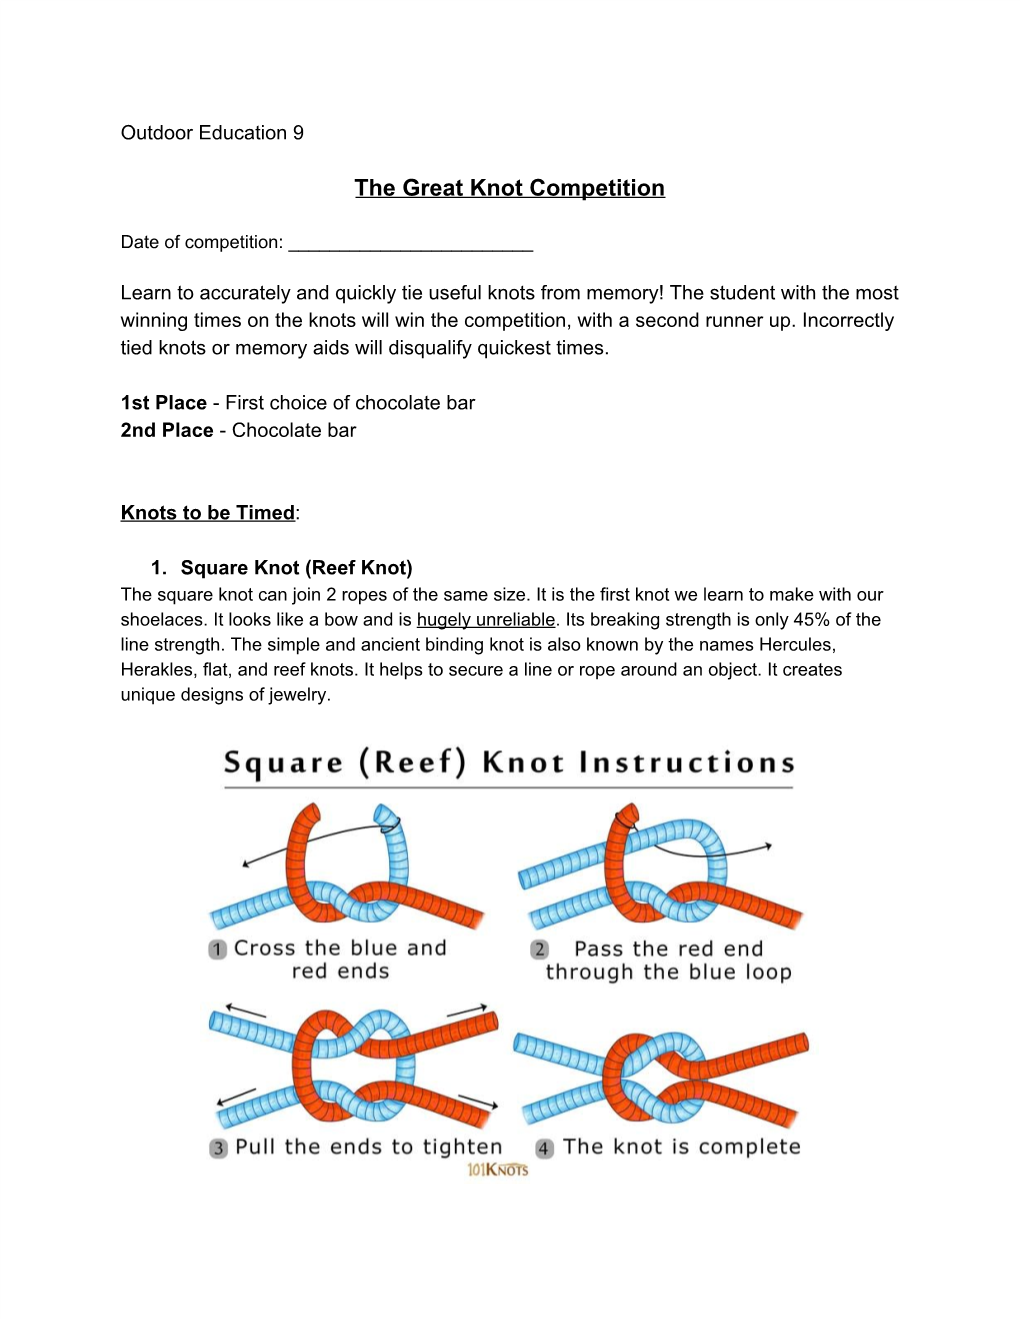 The Great Knot Competition